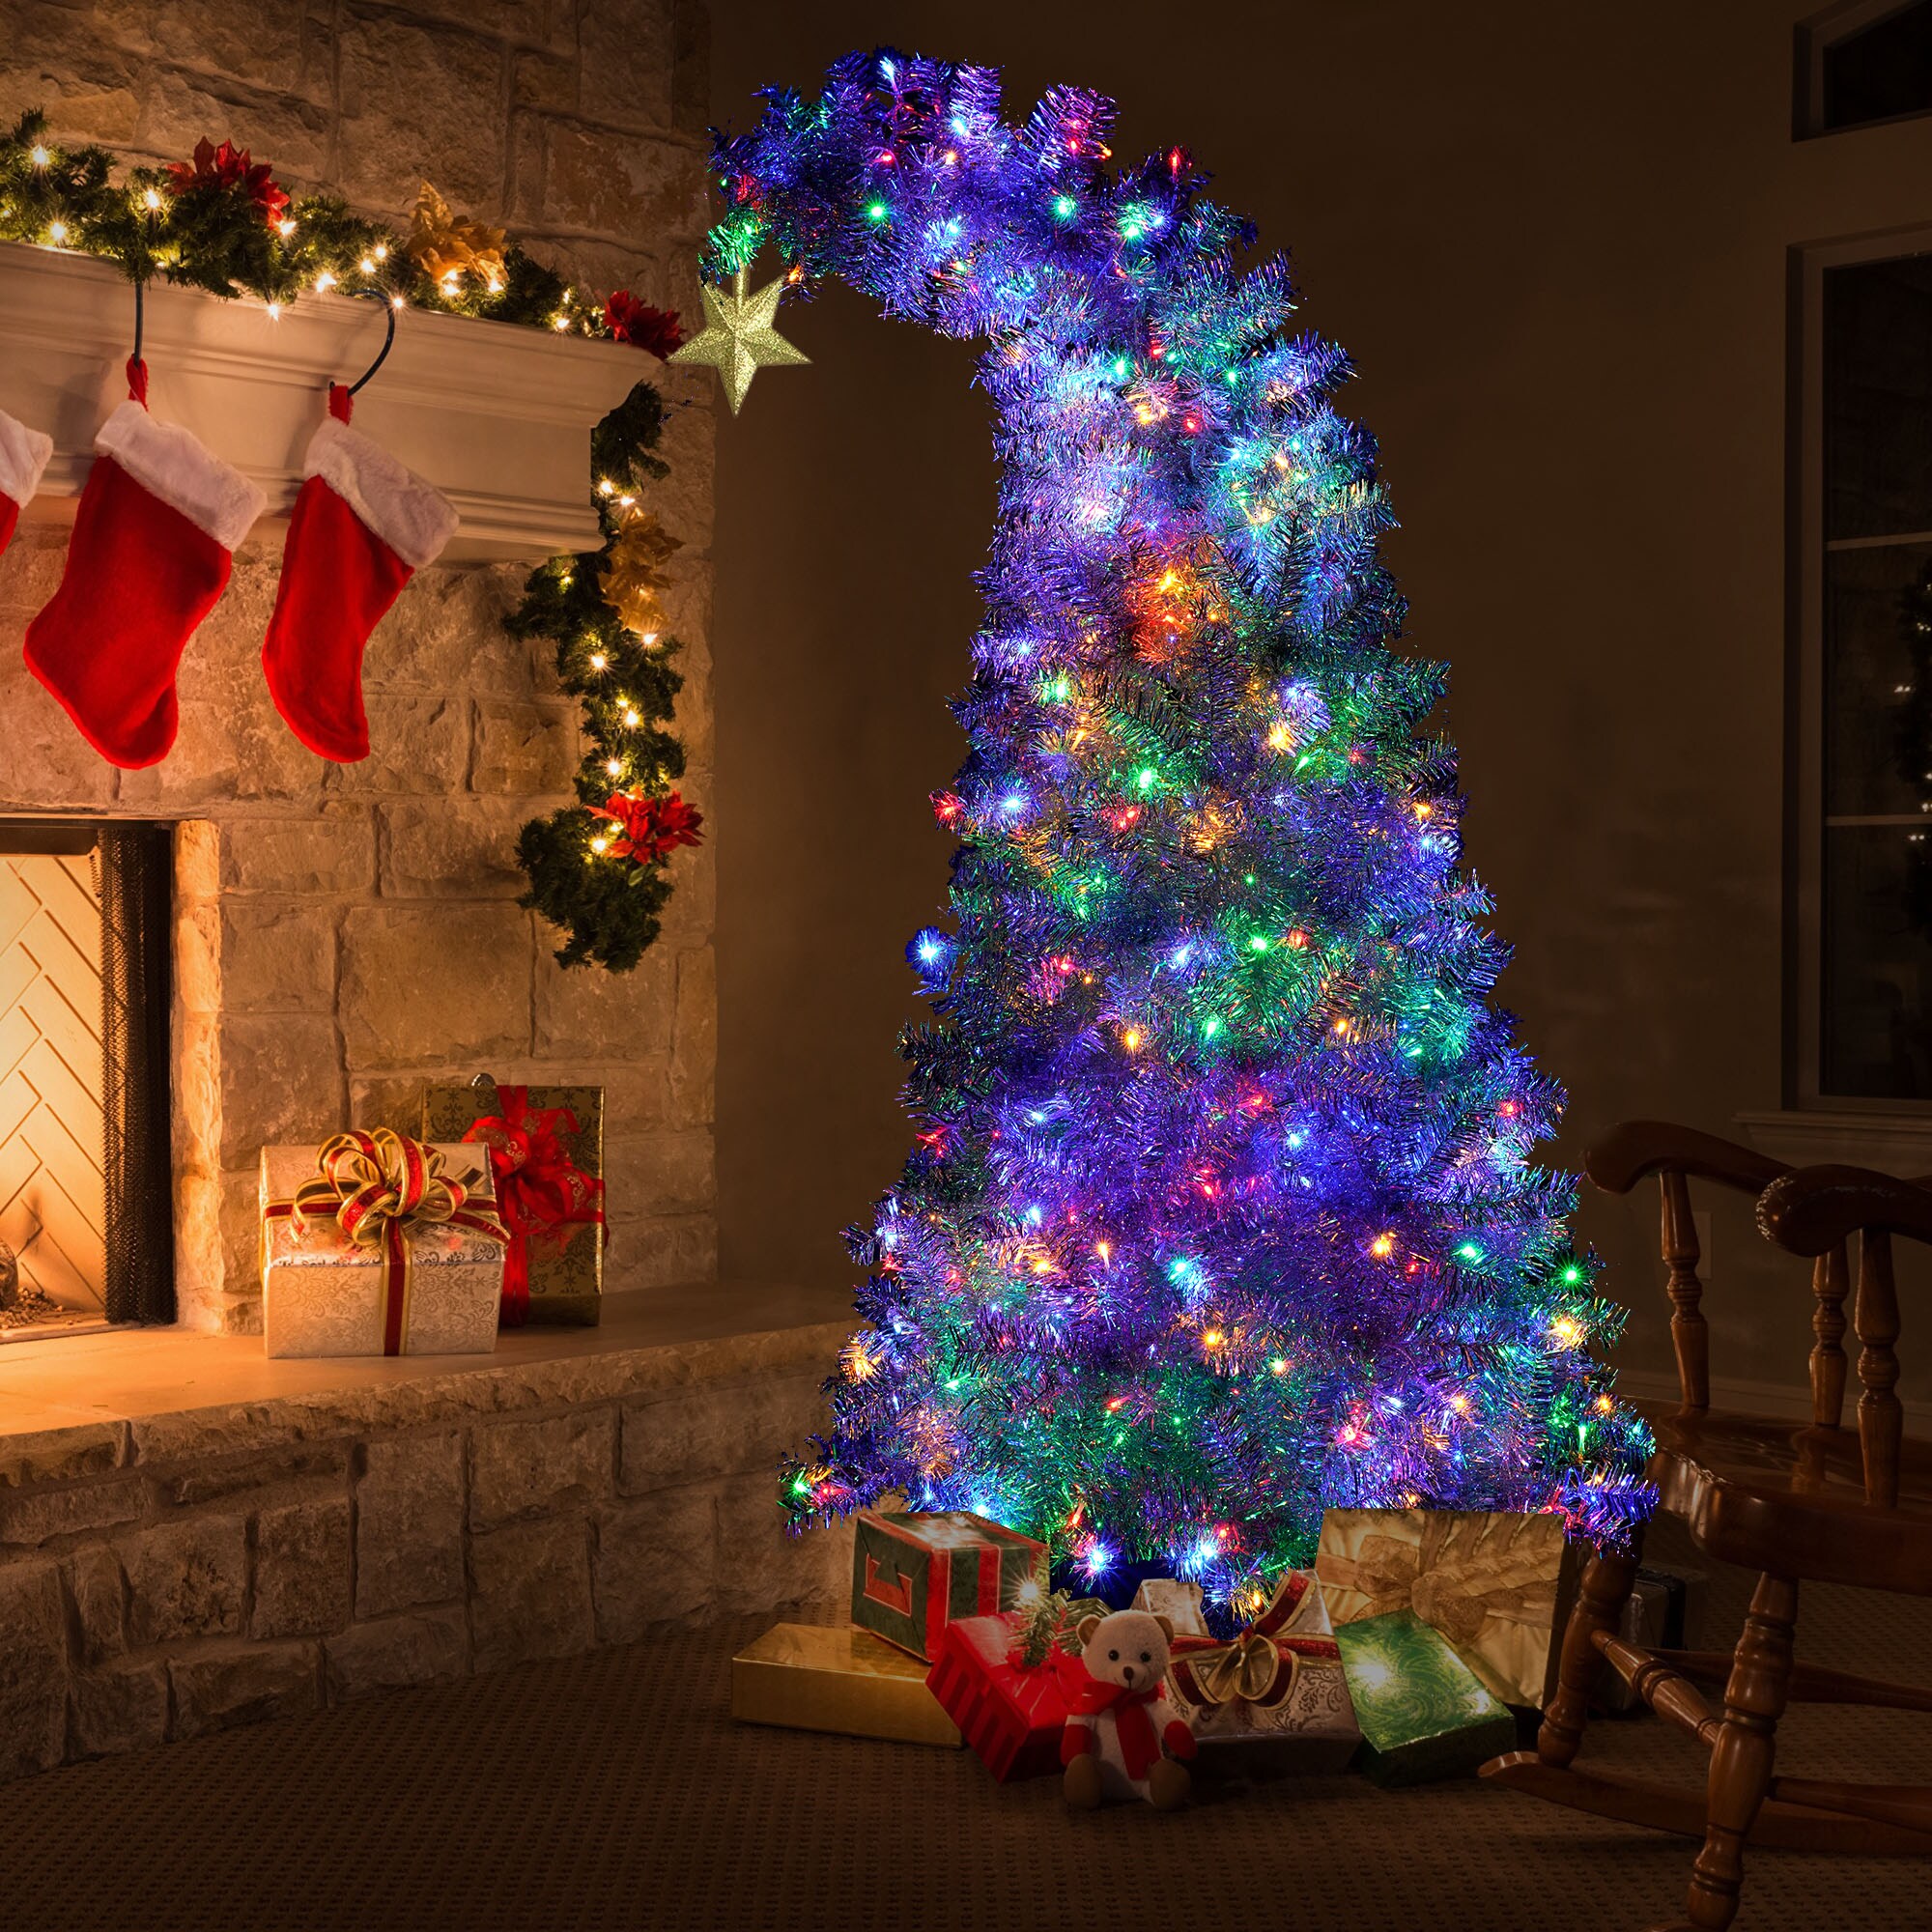 WELLFOR Remote Control Tree 8-ft Pre-lit Flocked Artificial